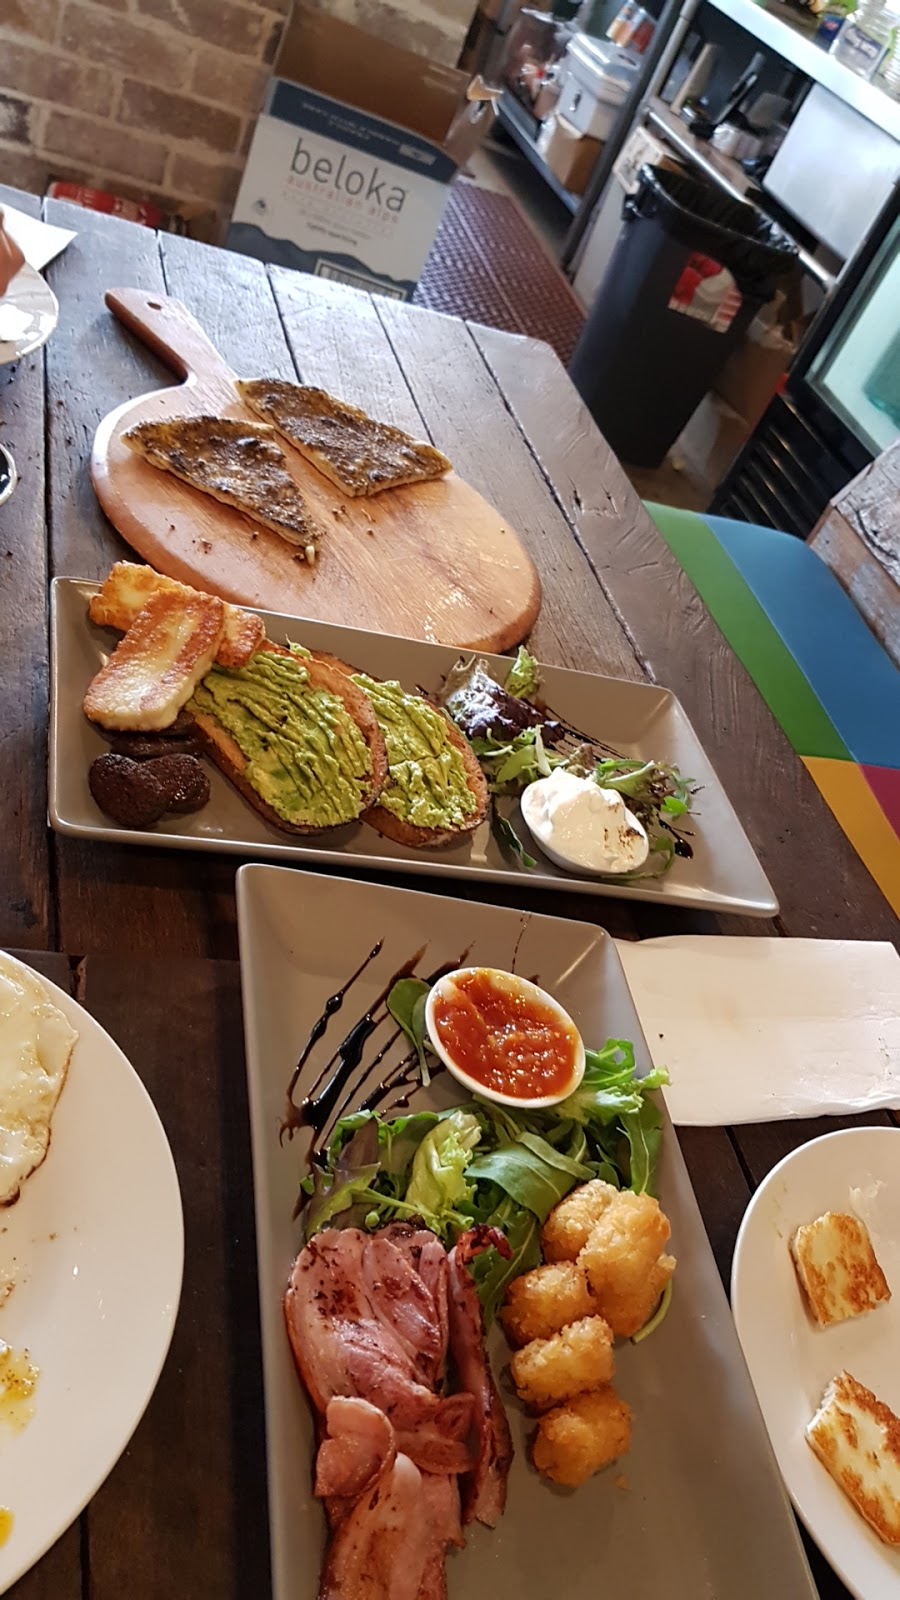 Cafe Geo | cafe | 4/703 Mowbray Rd W, Lane Cove North NSW 2066, Australia | 0294187711 OR +61 2 9418 7711